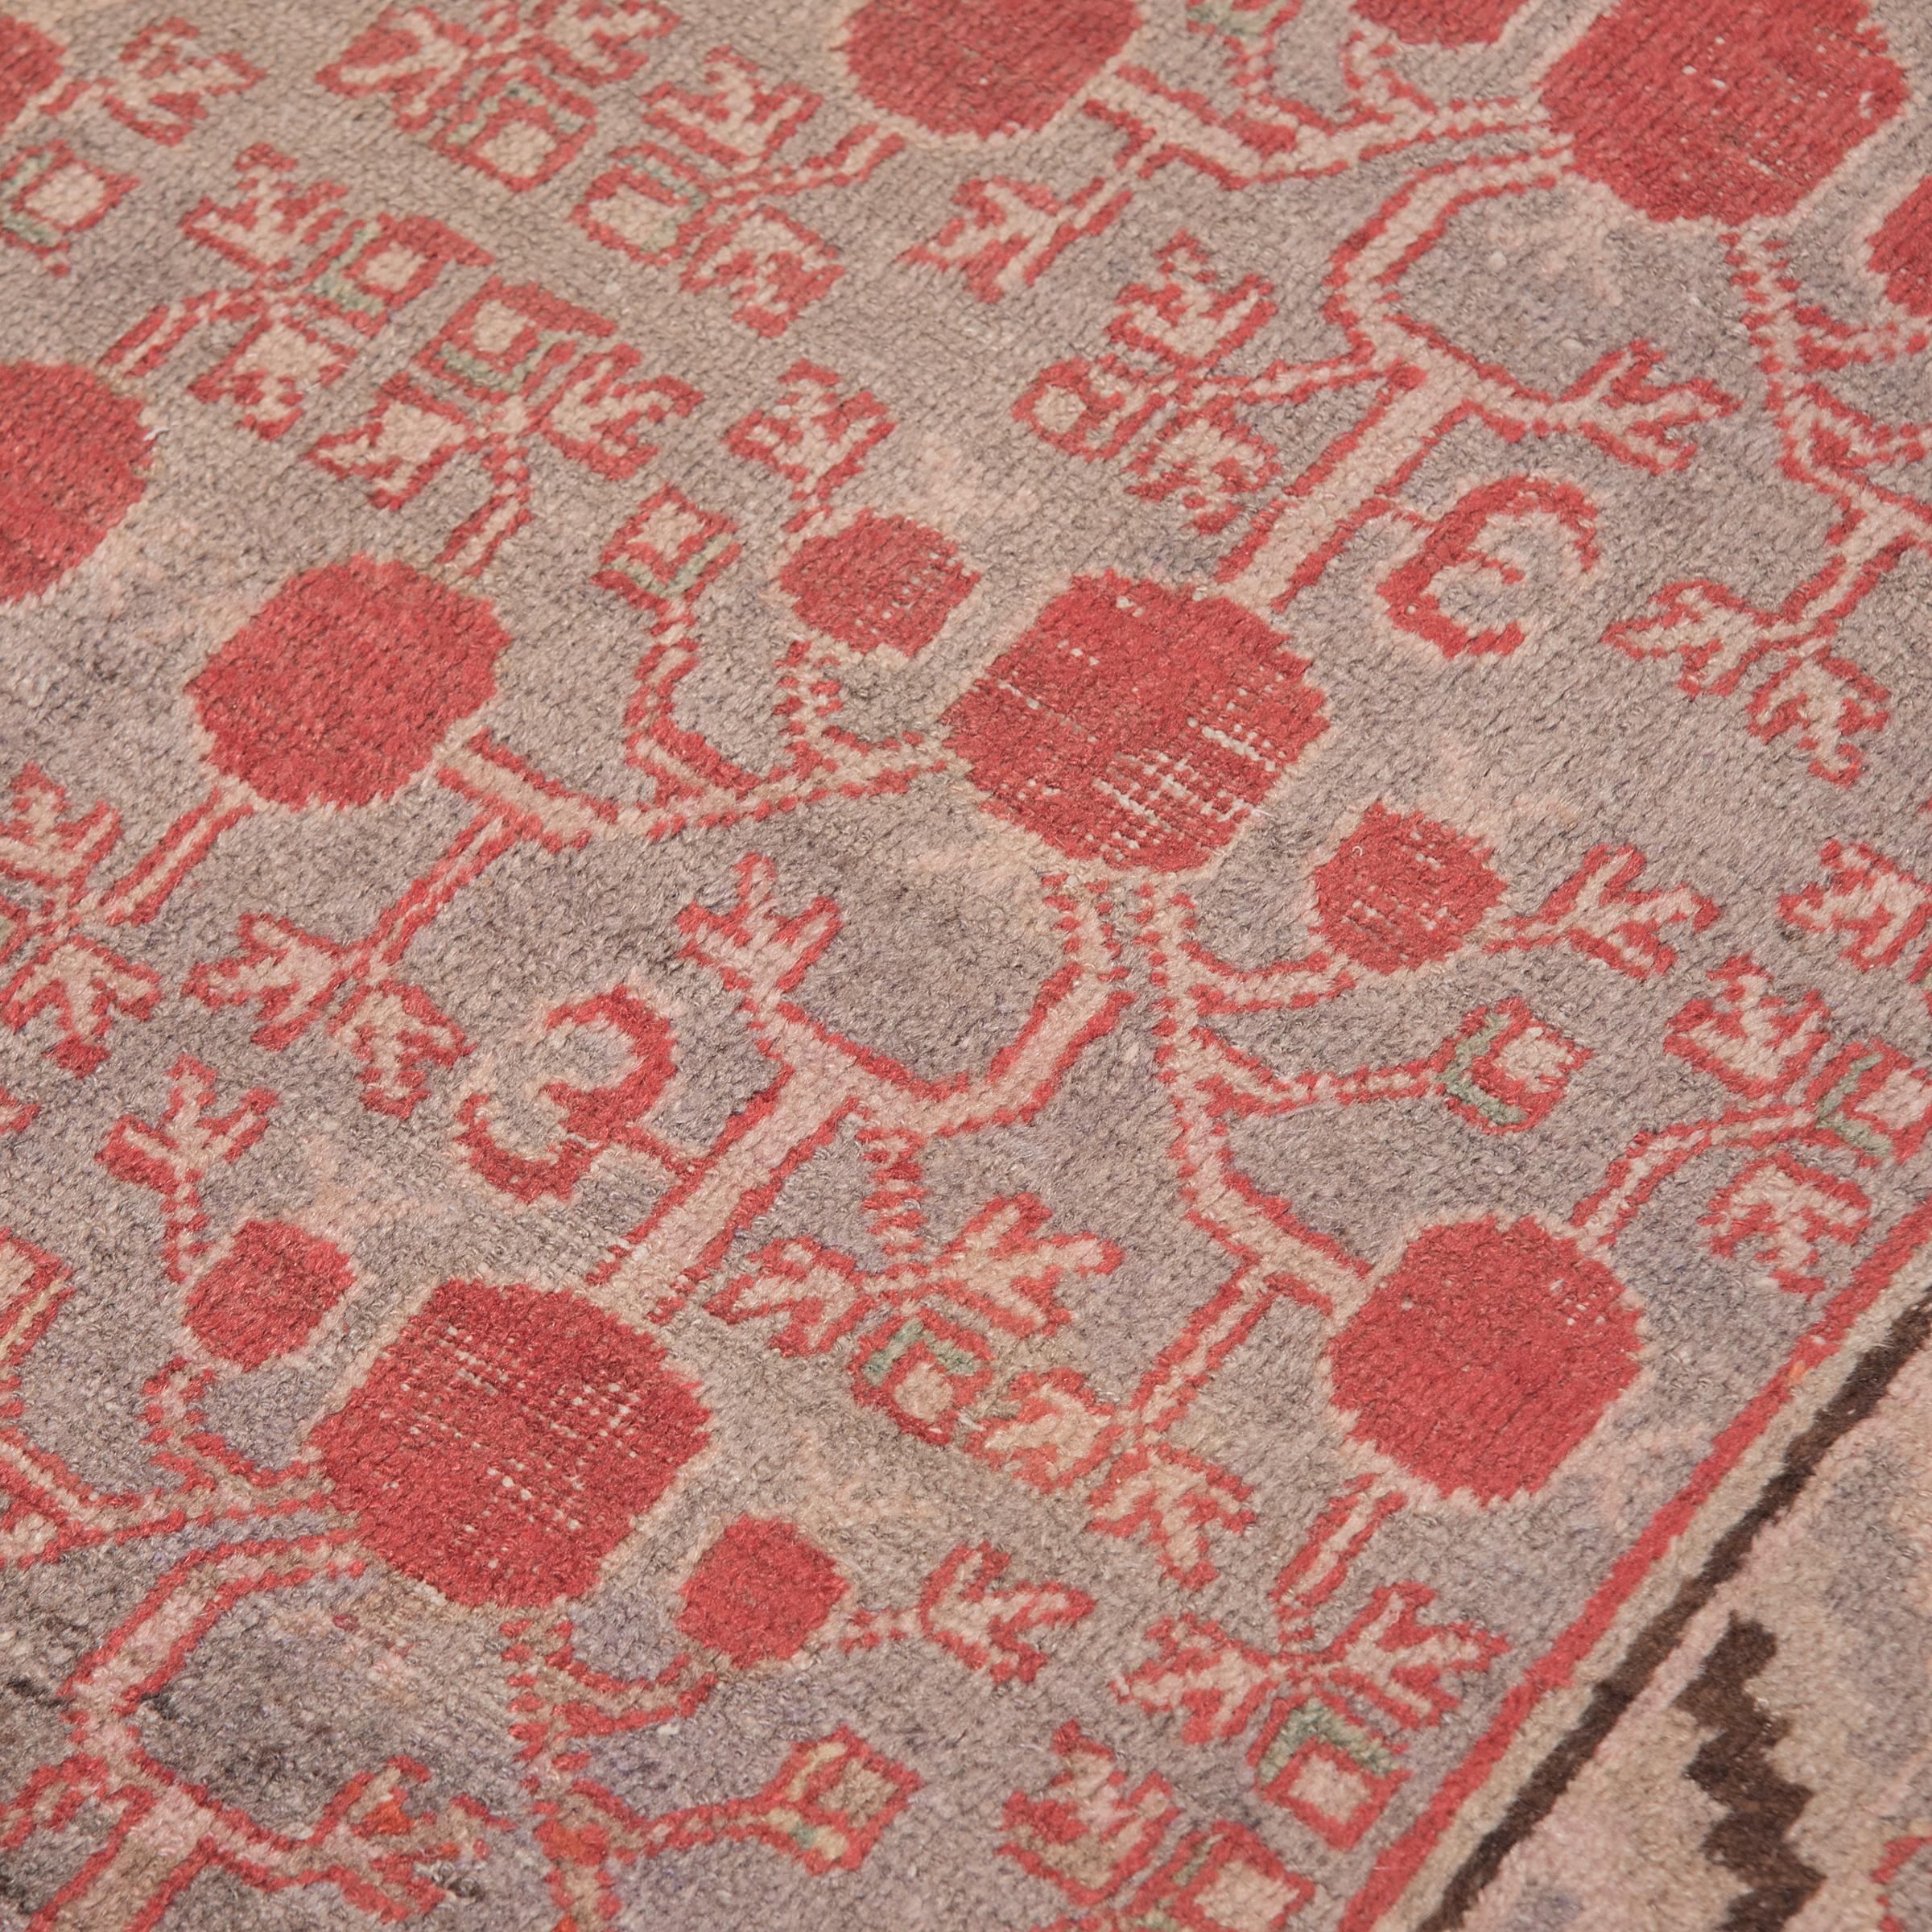 One of the most remote locations in Asia, the area known as East Turkestan was a pivotal stop along the Silk Road, uniting the cultures of India, Persia, and China. This rich multicultural mix is reflected in the exquisite carpets created in the